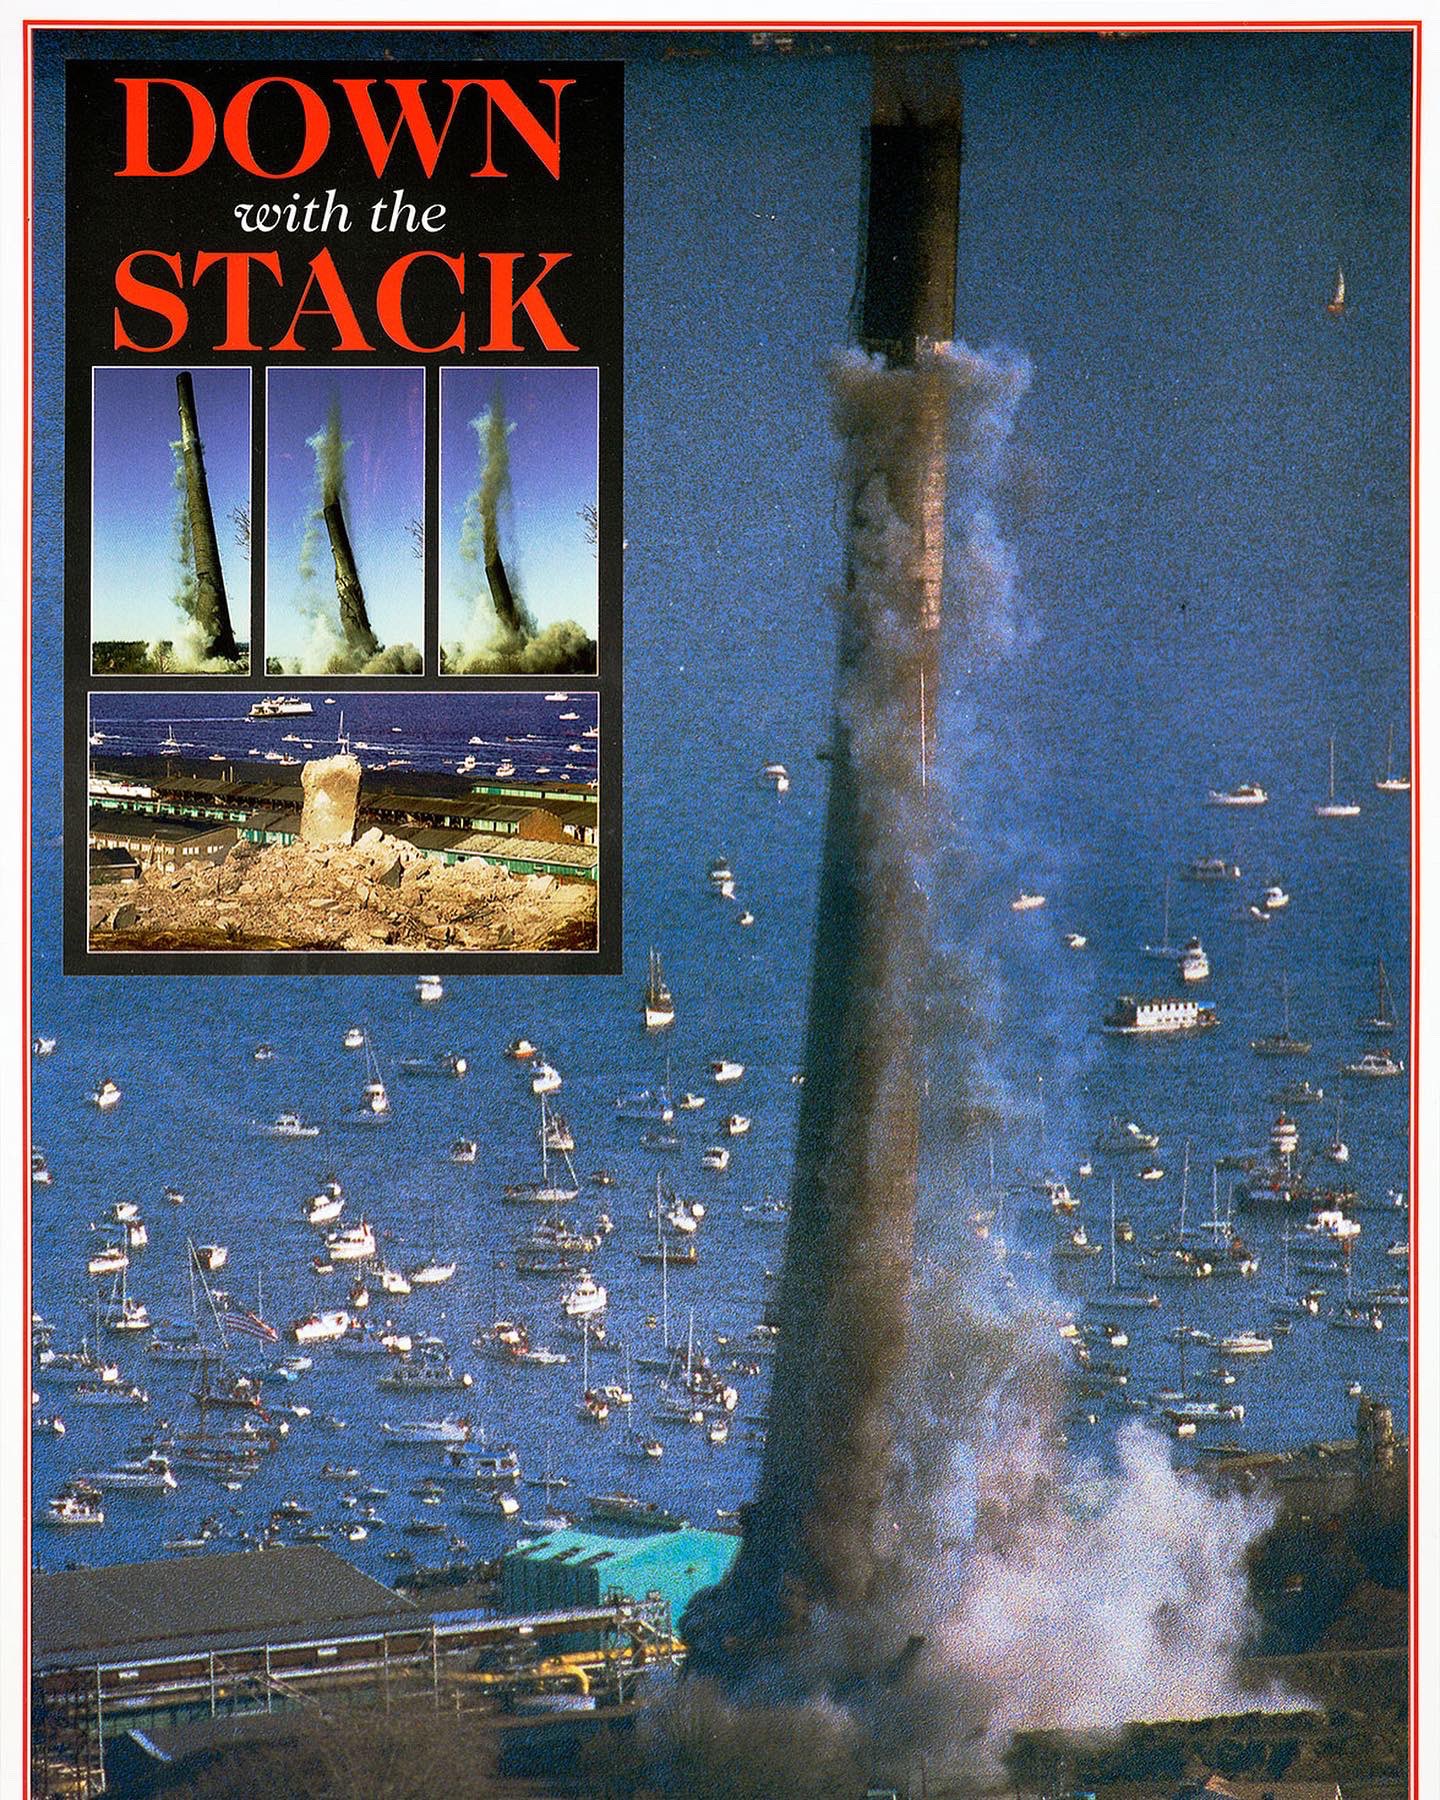 A commemorative poster from the smokestack demolition in 1993, courtesy of the Washington State Historical Society.